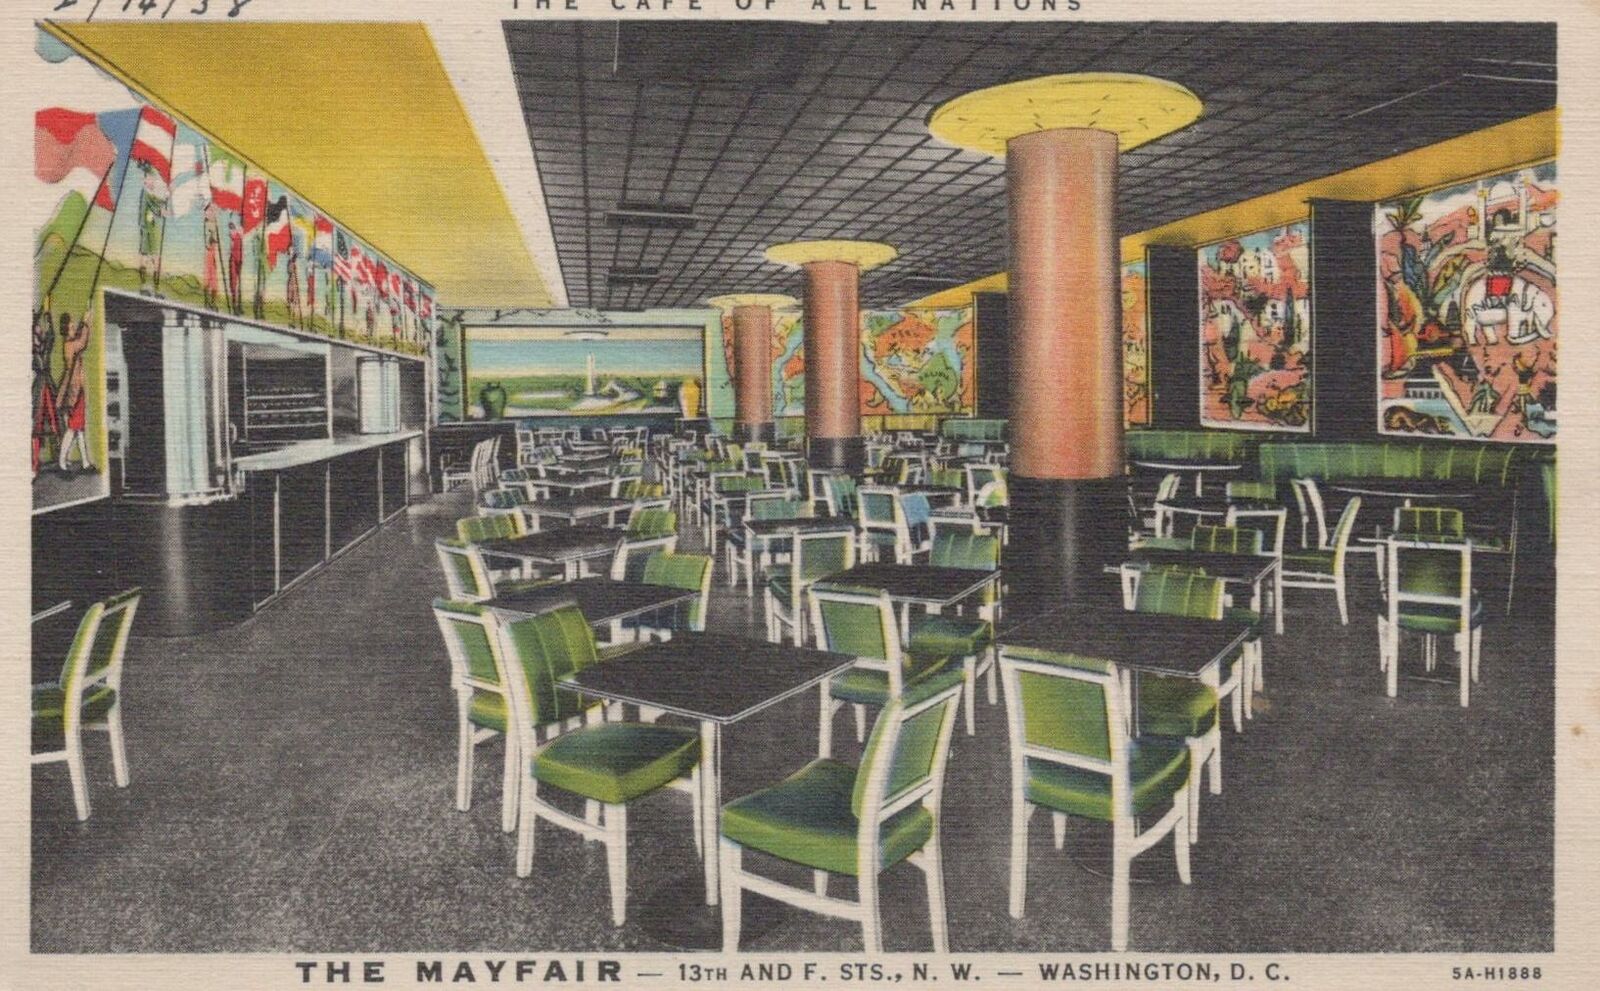 Postcard The Mayfair Cafe of All Nations Washington DC 